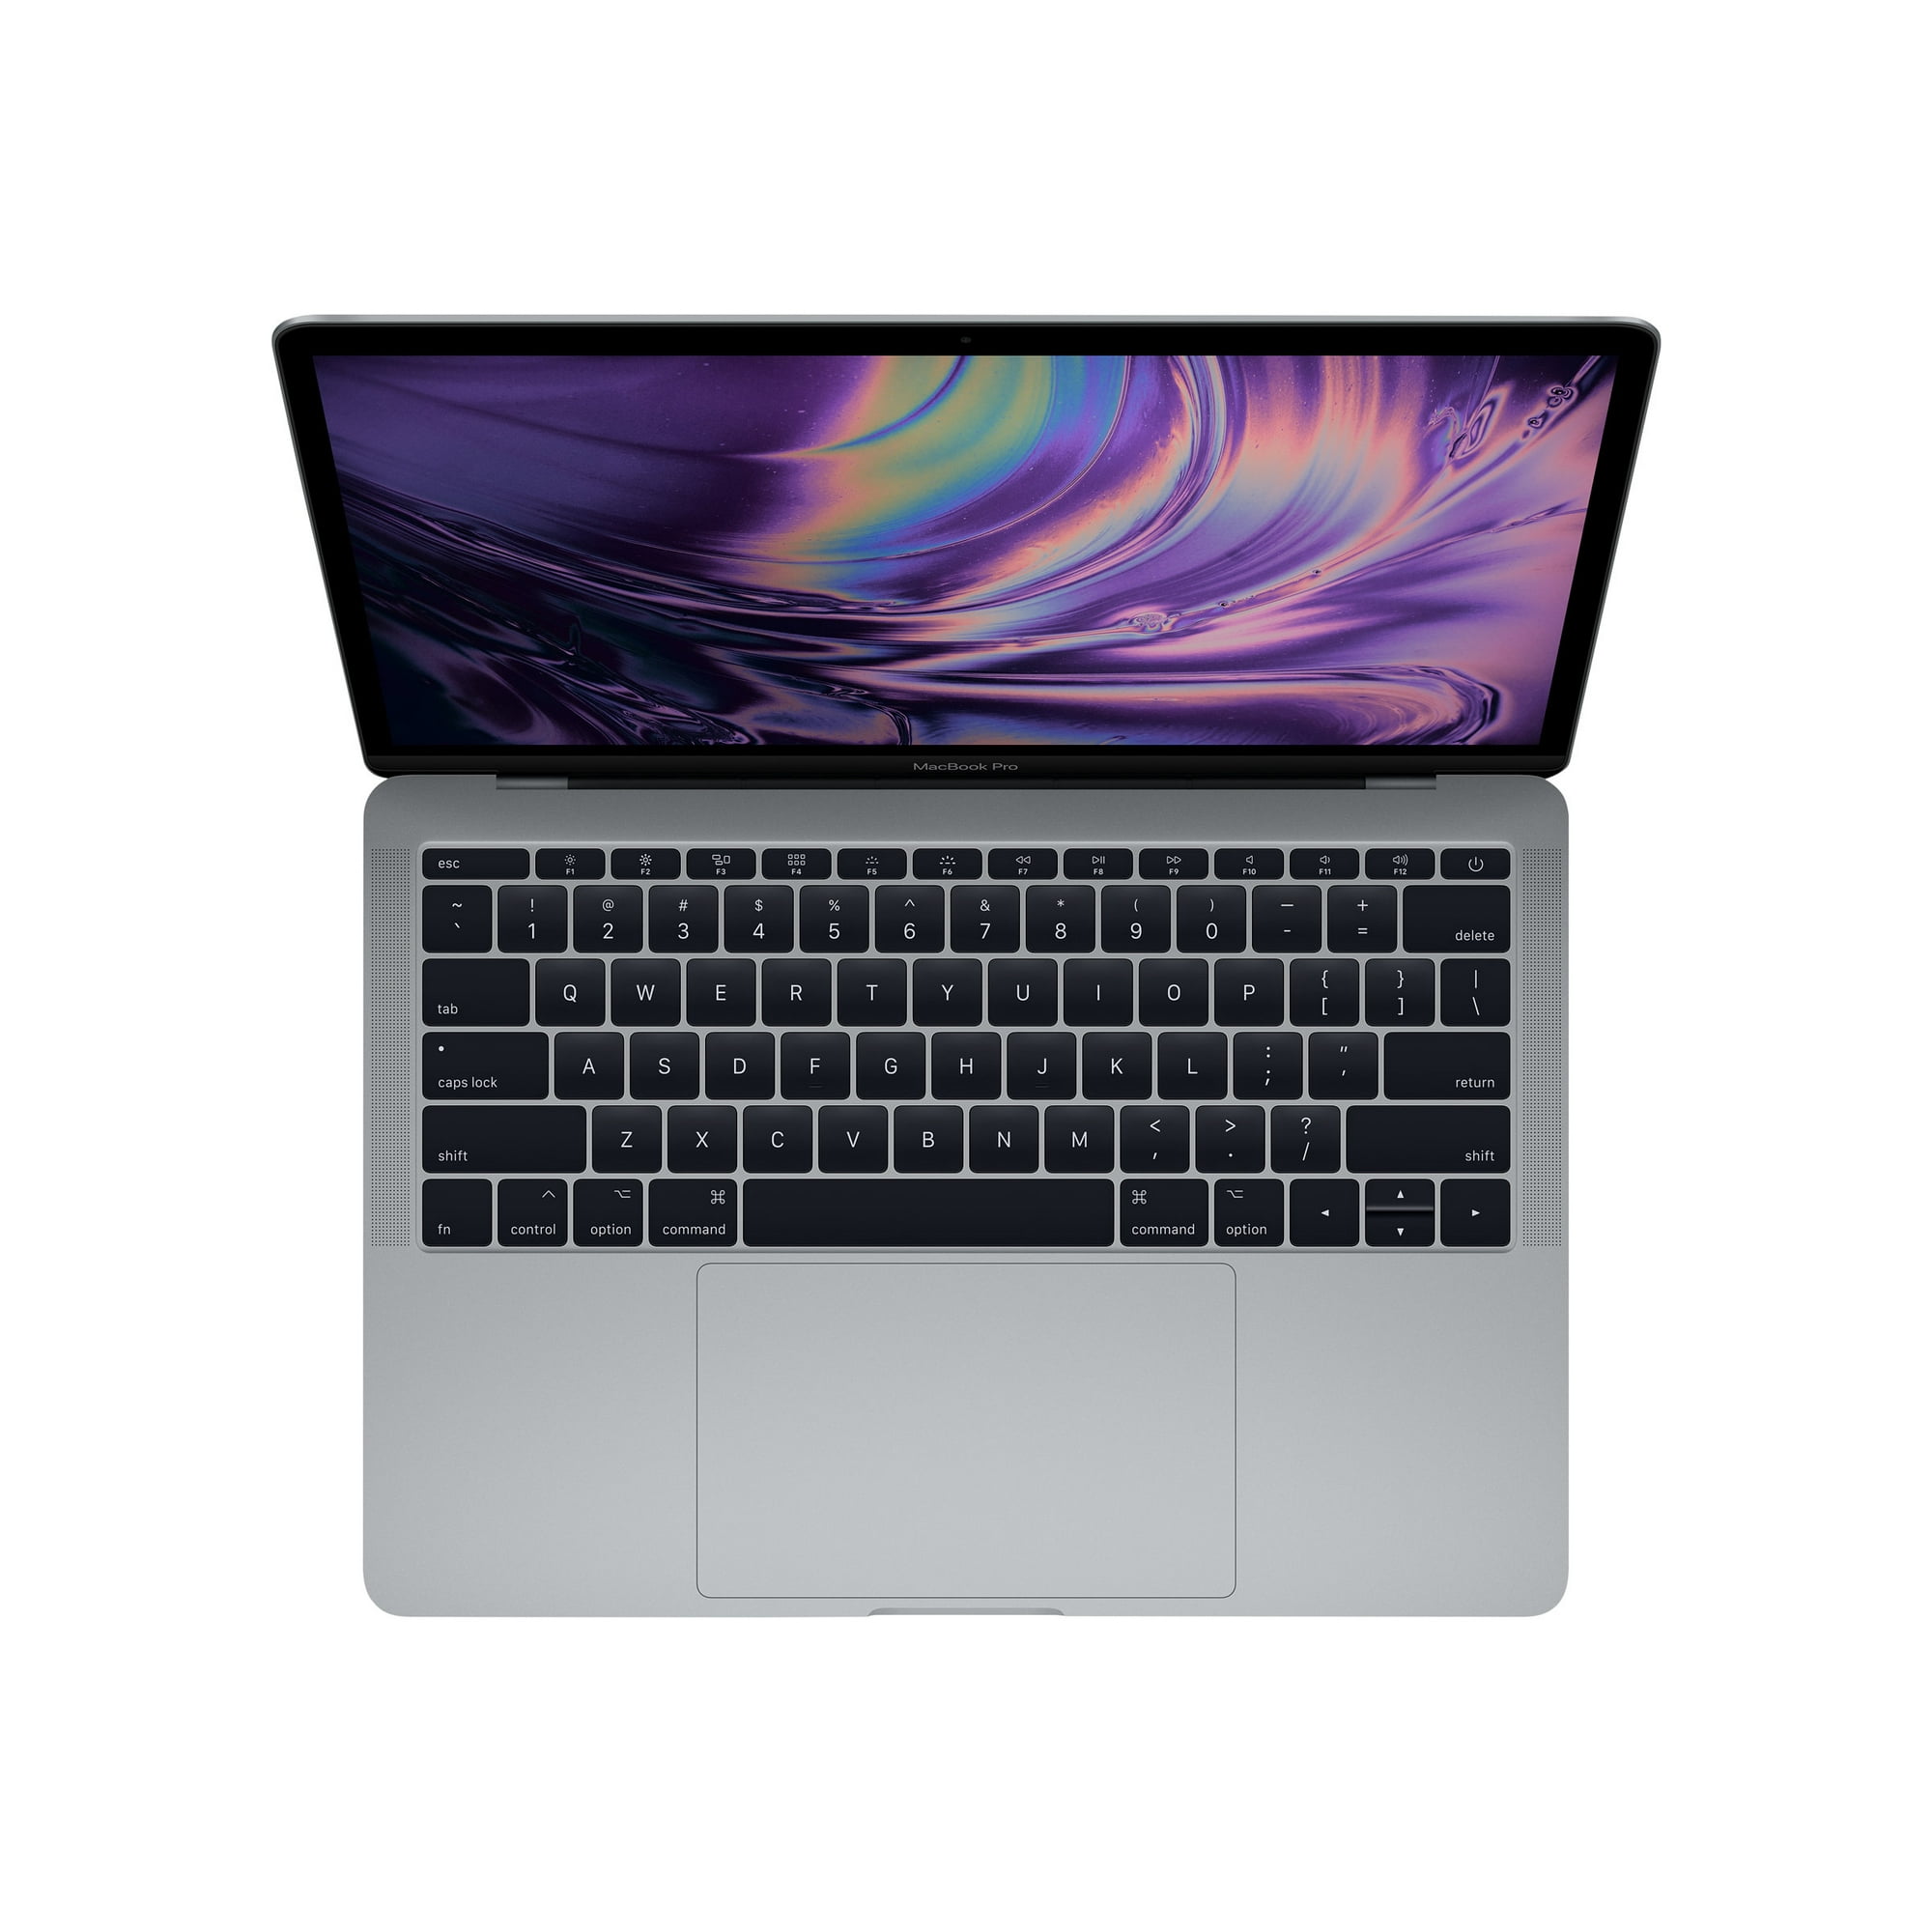 Apple MacBook Pro with Touch Bar - Intel Core i7 2.6 GHz - Radeon